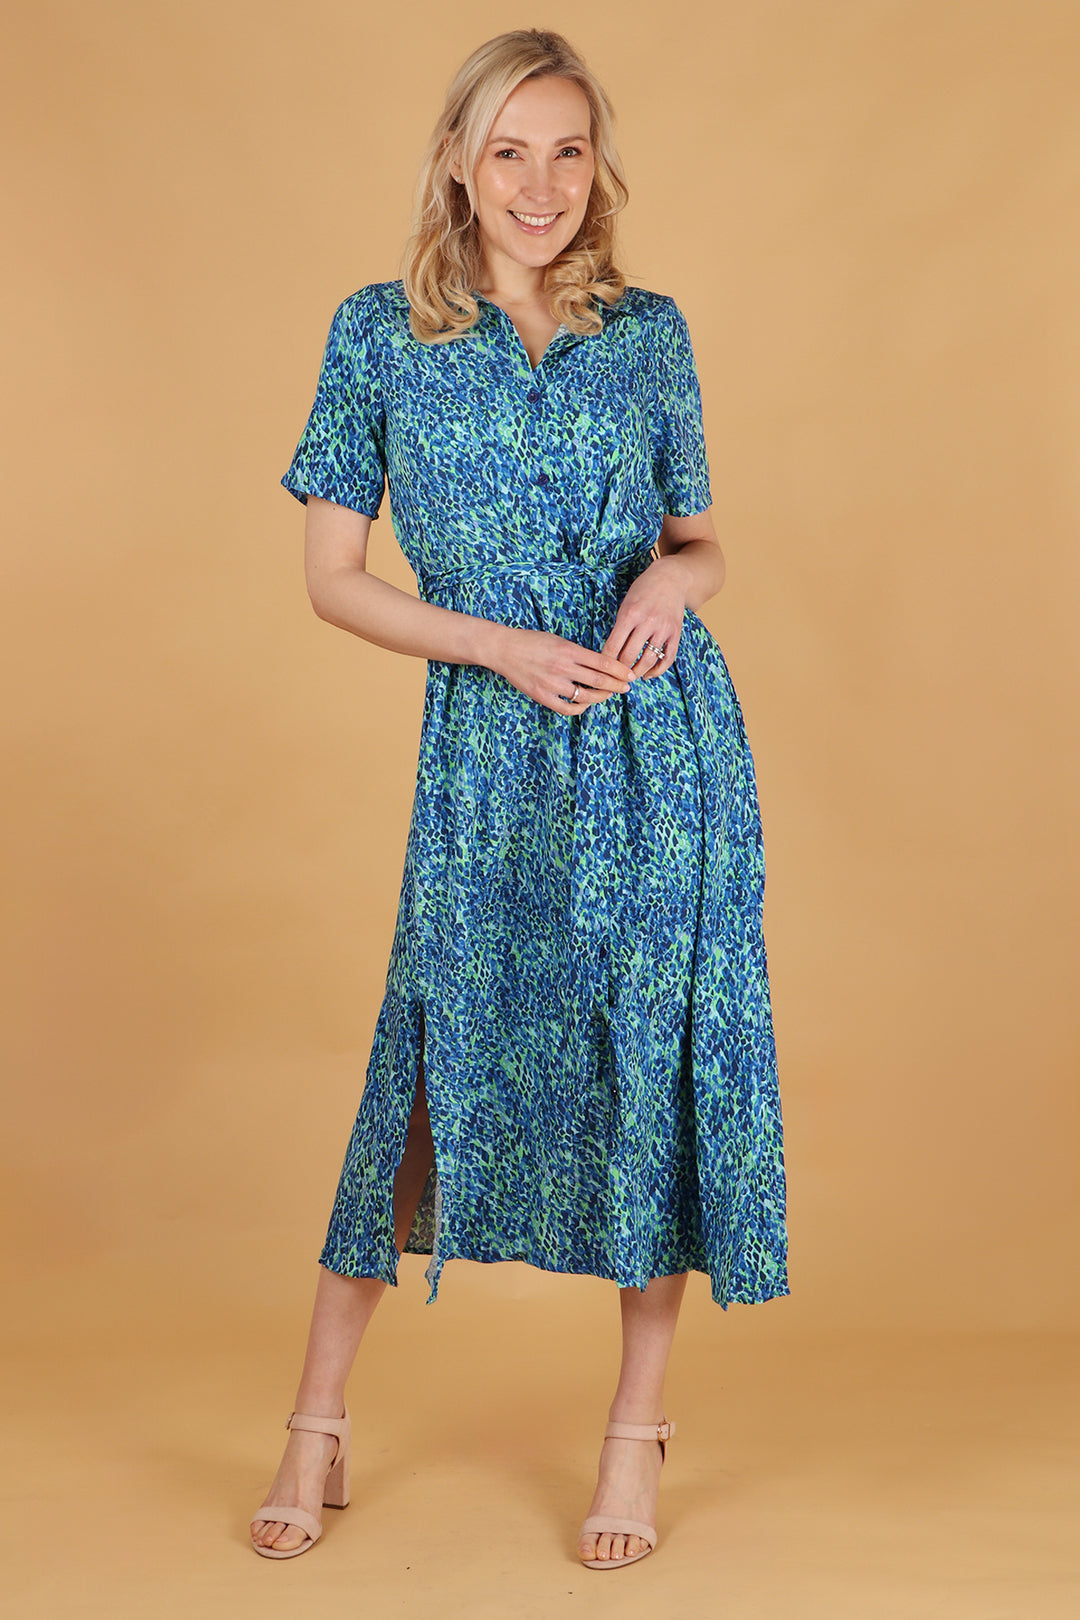 model wearing a blue and green abstract print shirt dress with button down front and waist tie